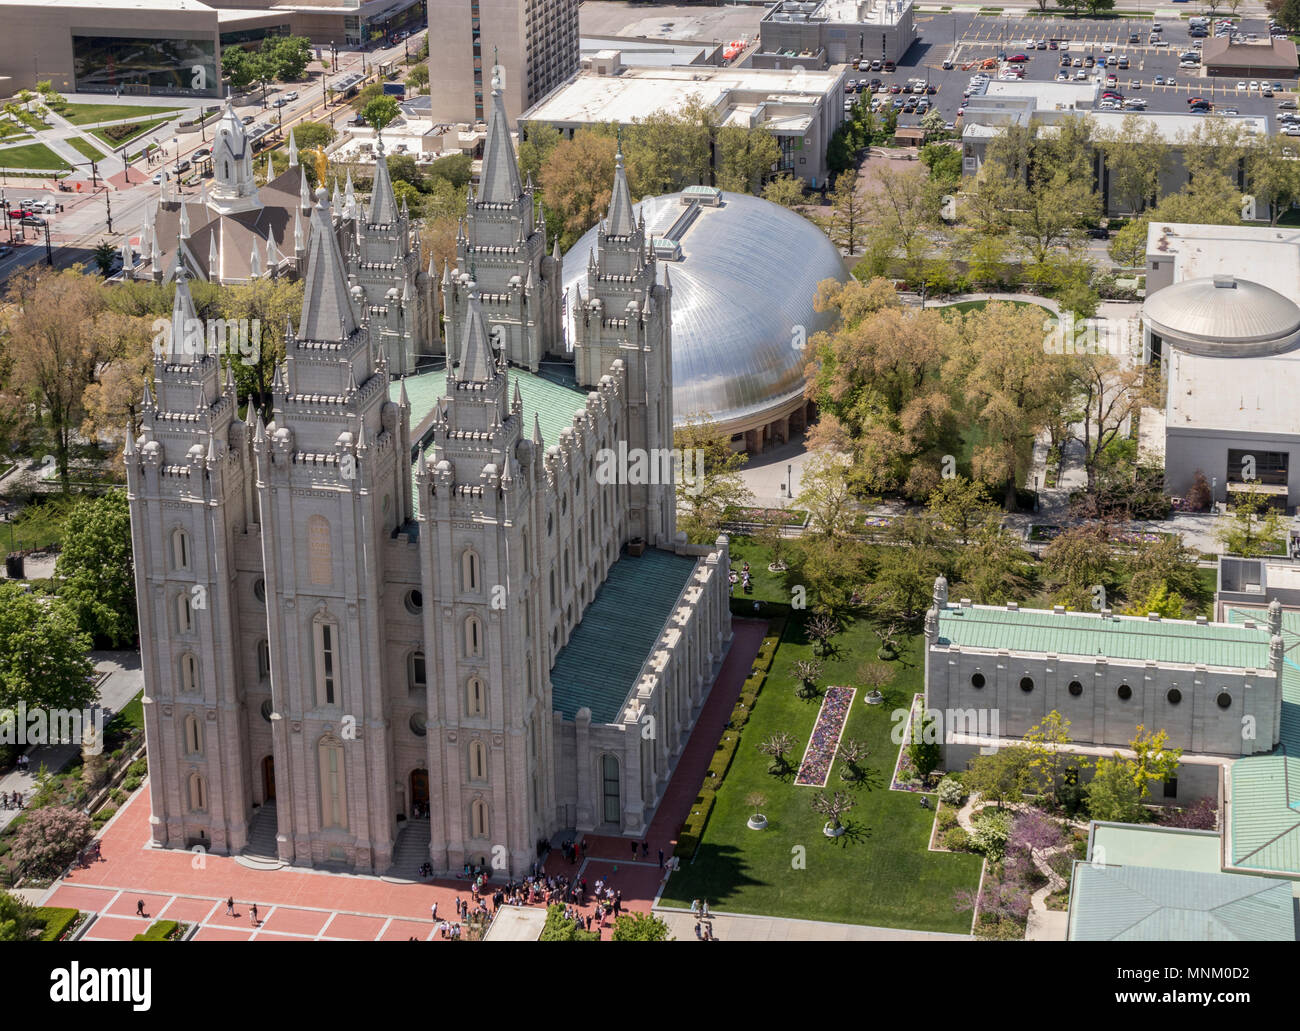 Aerial view of Temple Square, Salt Lake Temple and Tabernacle. Church of Jesus Christ of Latter-day Saints, Salt Lake City, Utah, USA. Stock Photo